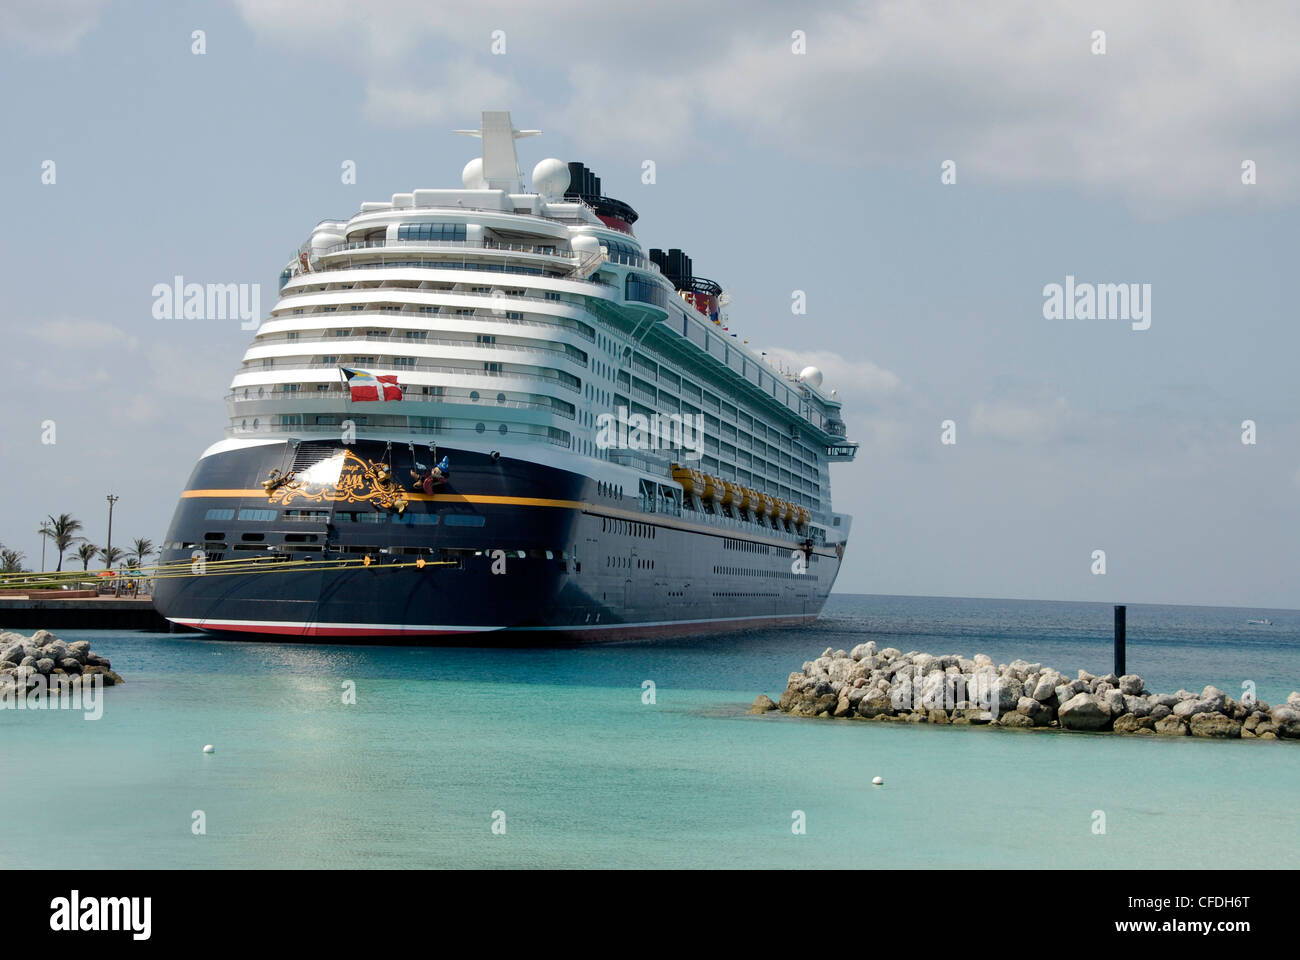 Disney Cruise Line's Disney Dream Cruise Ship on the private island of Castaway Cay in the Bahamas Stock Photo